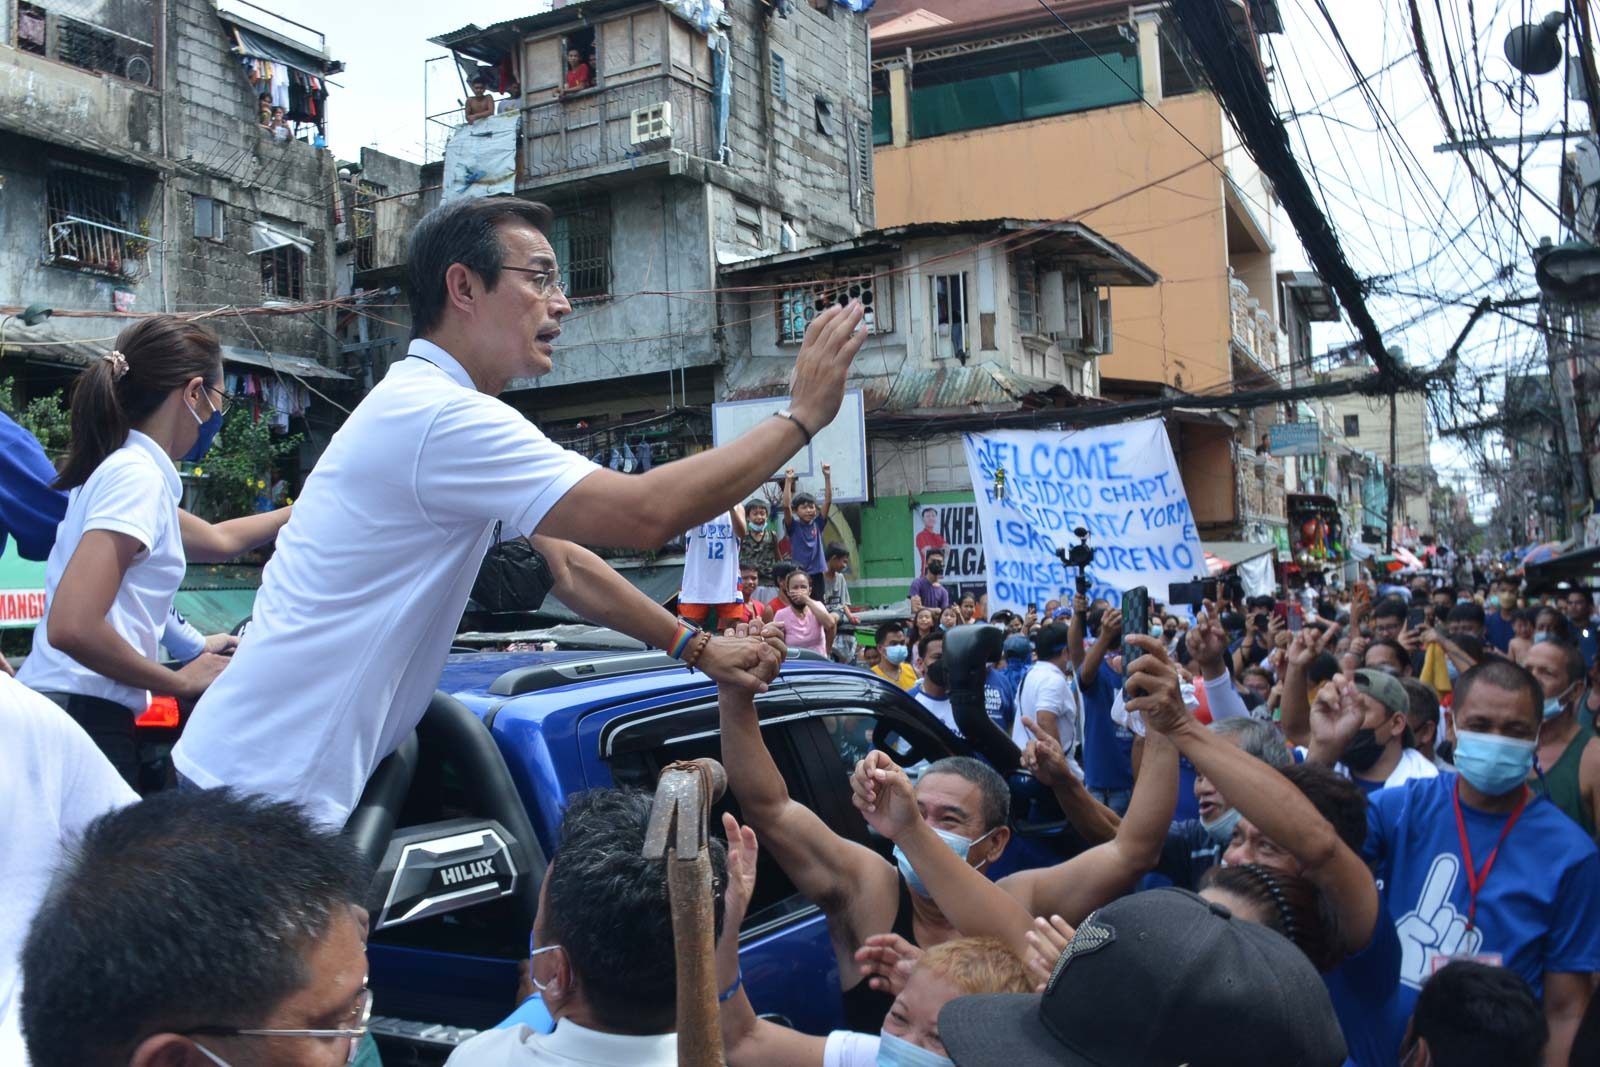 If elected, Isko Moreno would appoint Lacson to fight corruption